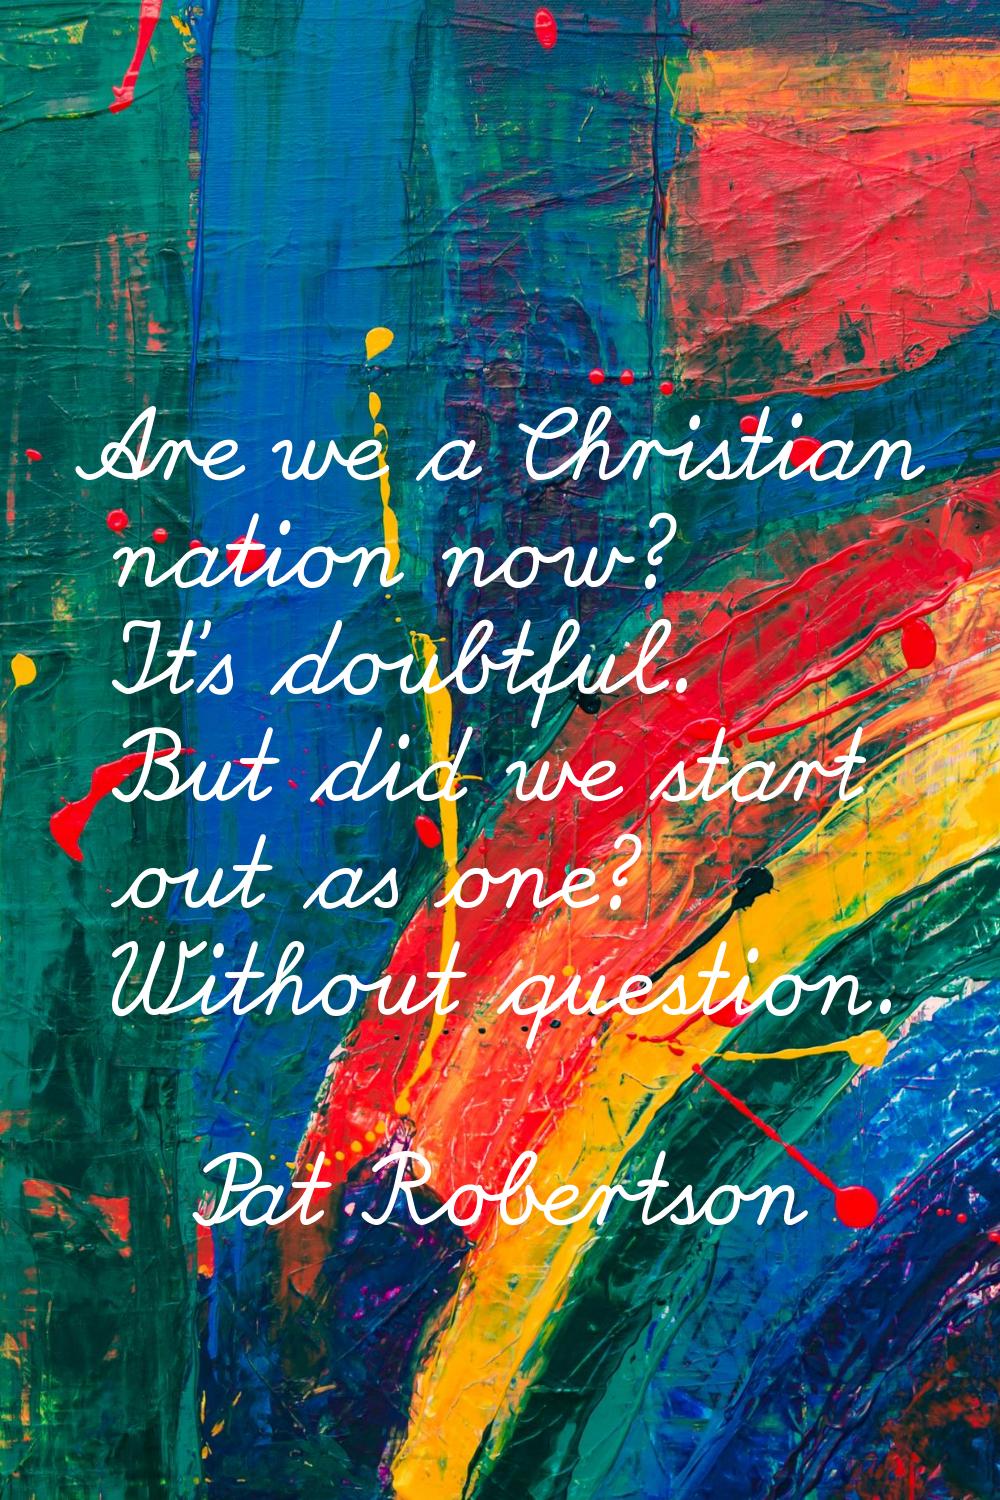 Are we a Christian nation now? It's doubtful. But did we start out as one? Without question.